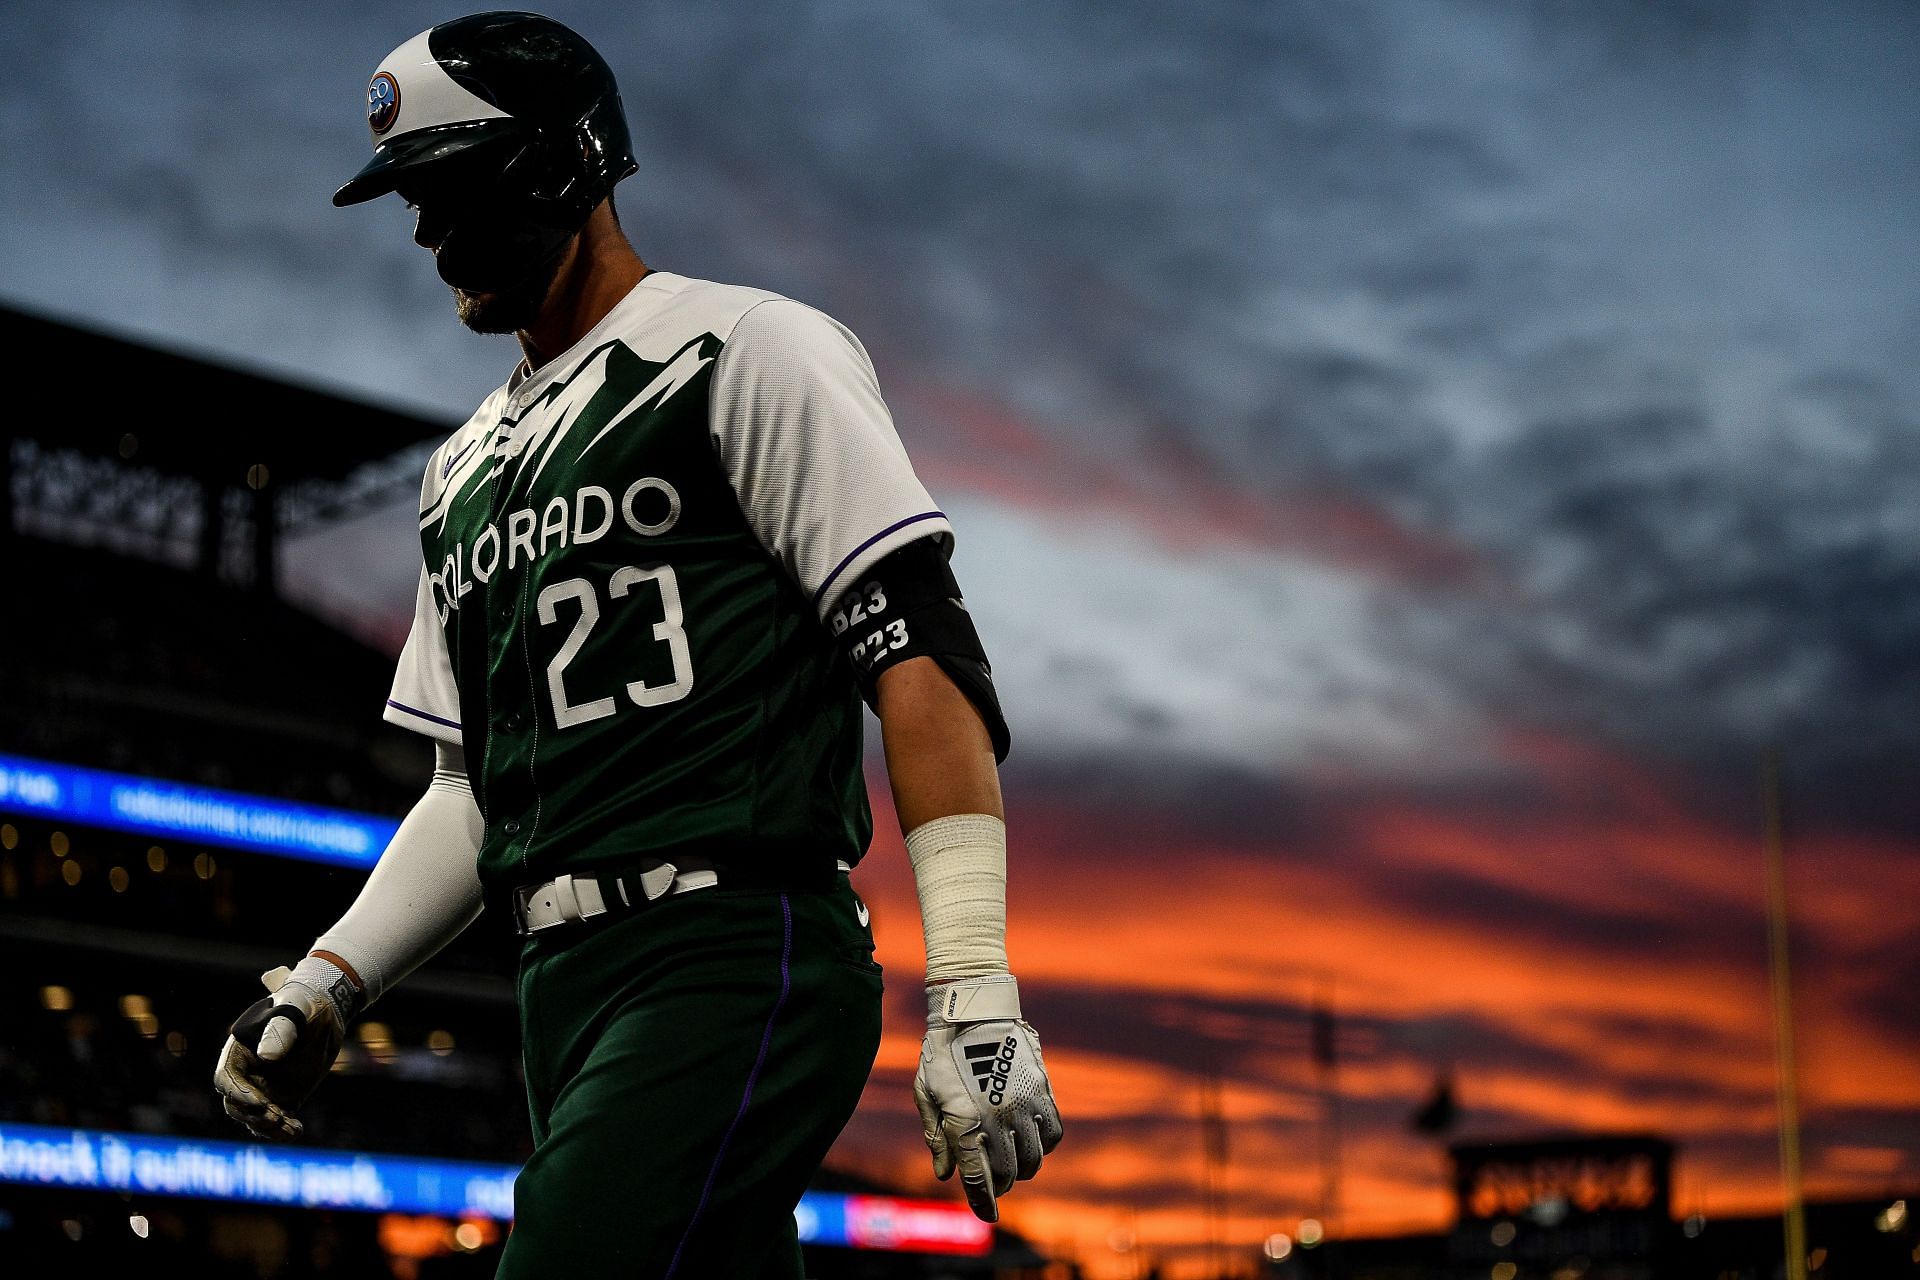 Kris Bryant injury update: Kris Bryant injury update: Health status and  expected recovery timeline for Colorado Rockies star